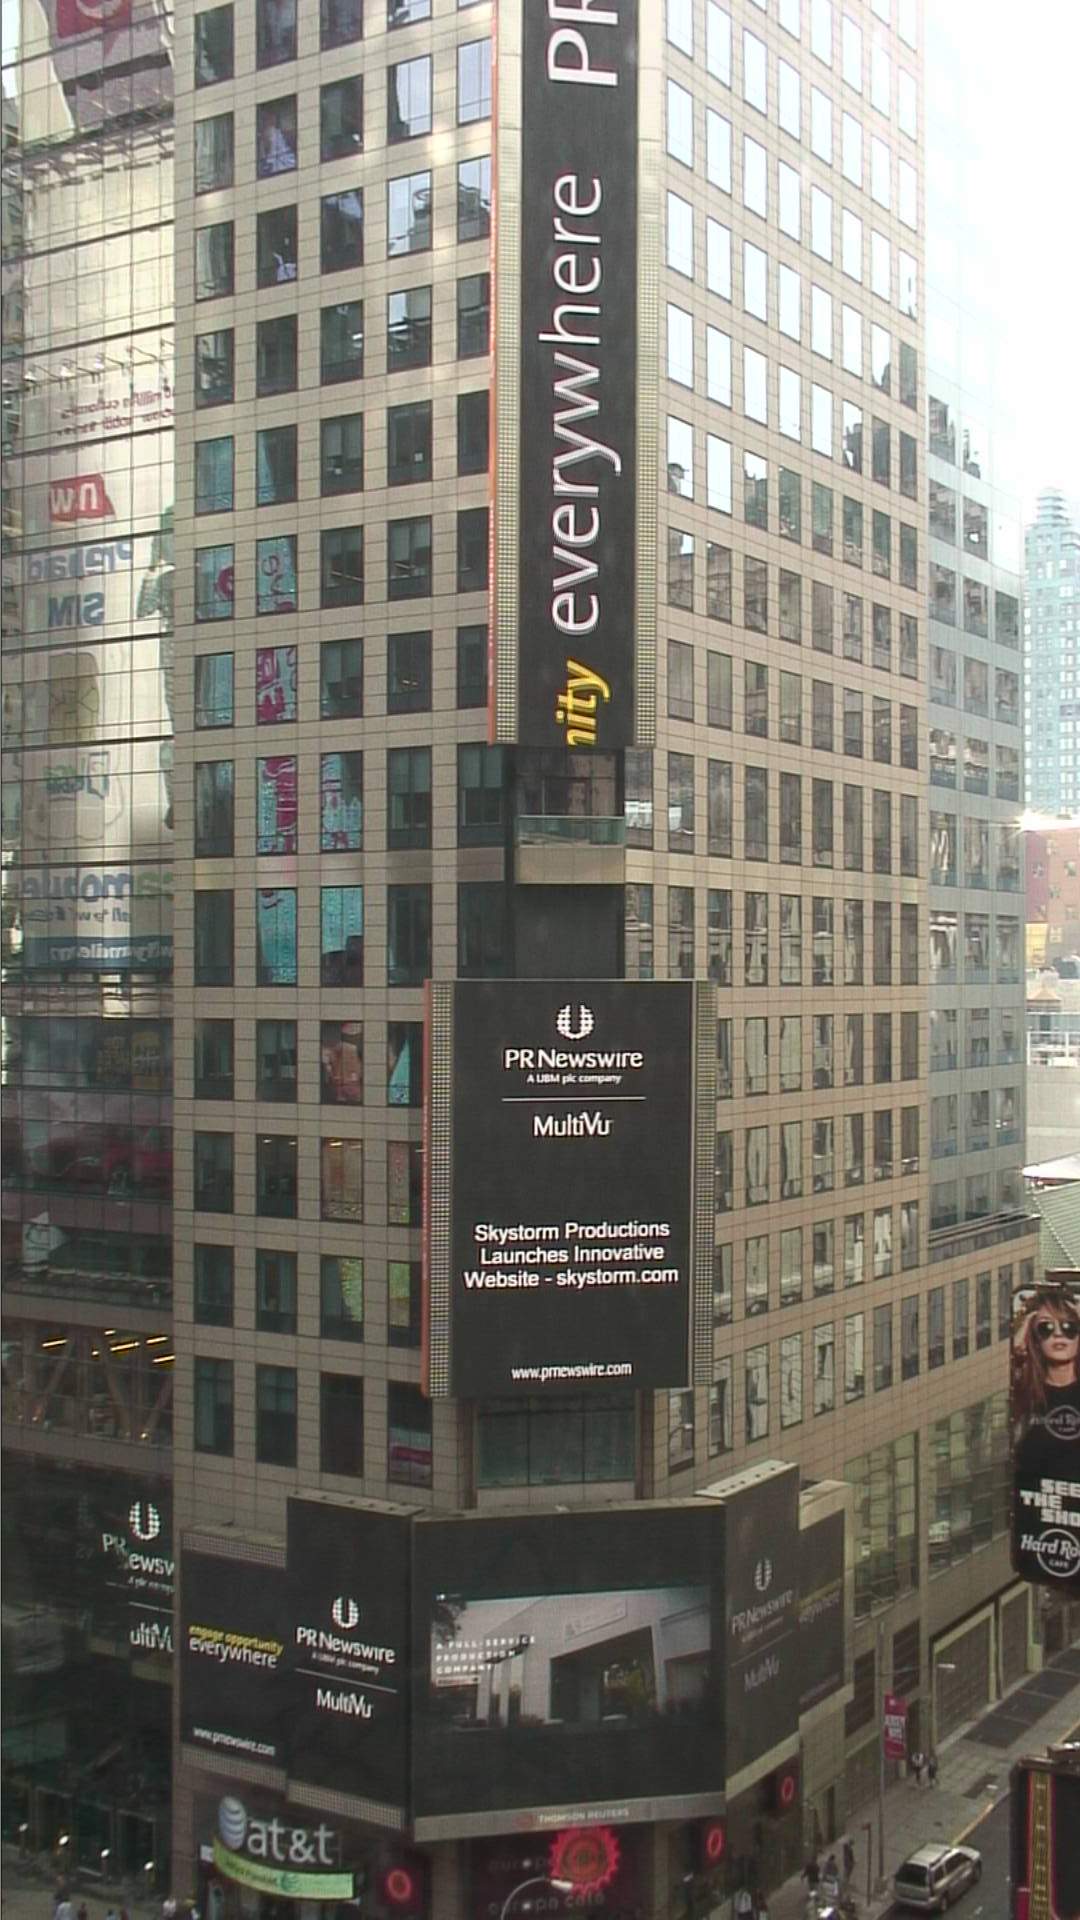 Our Press Release Hits Times Square, NY!